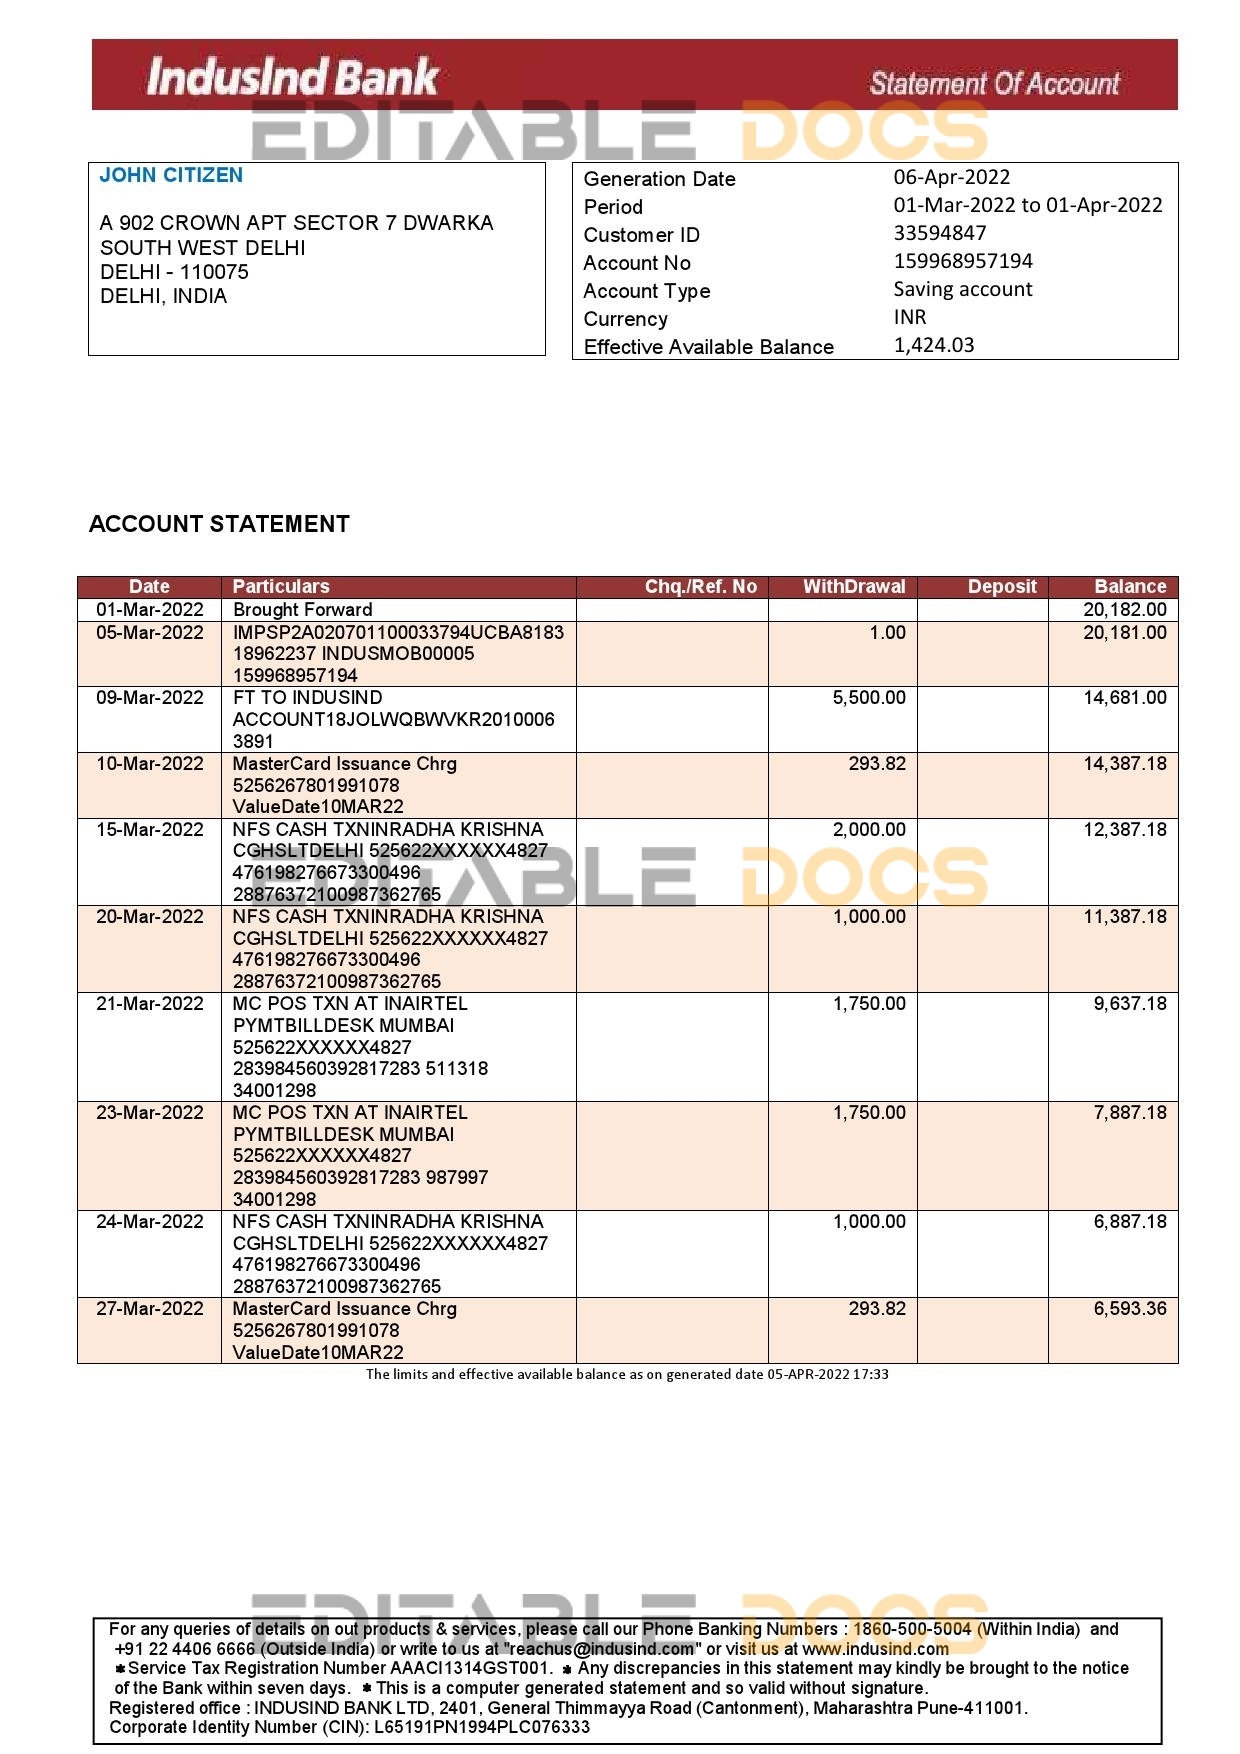 India IndusInd bank statement, Word and PDF template